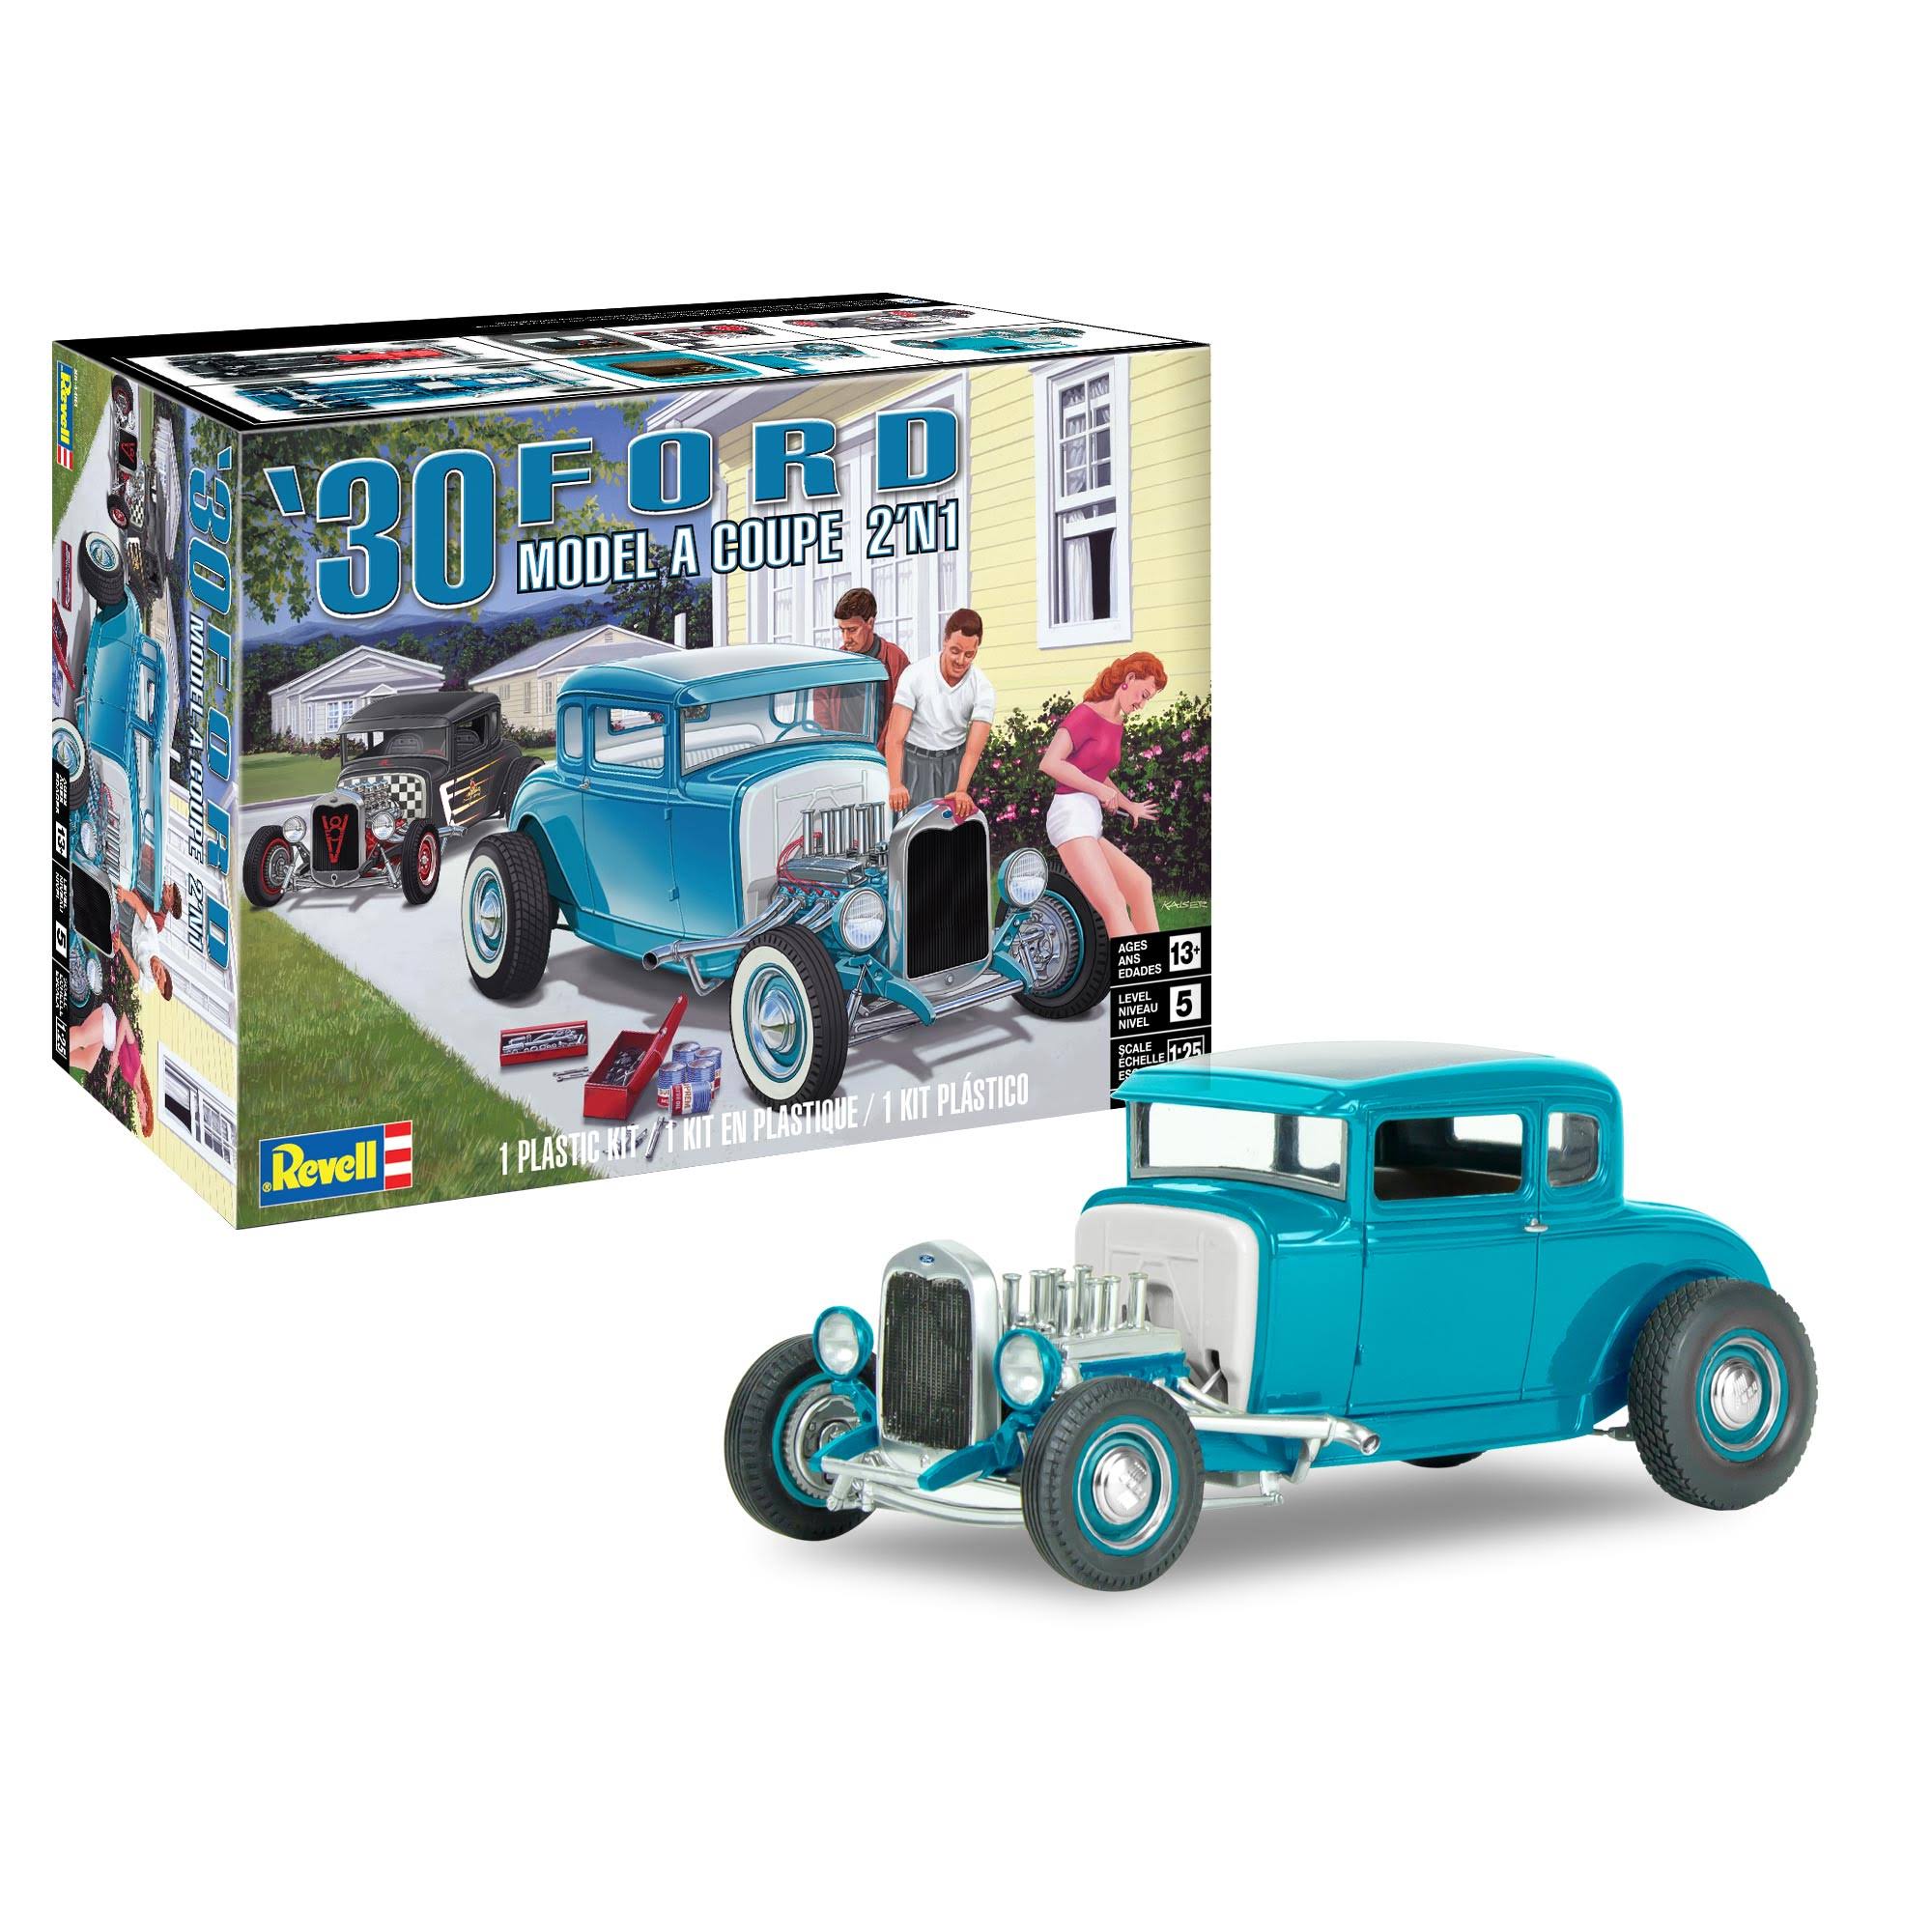 Revell 854464 1:25 1930 Ford Model A Coupe 2N1